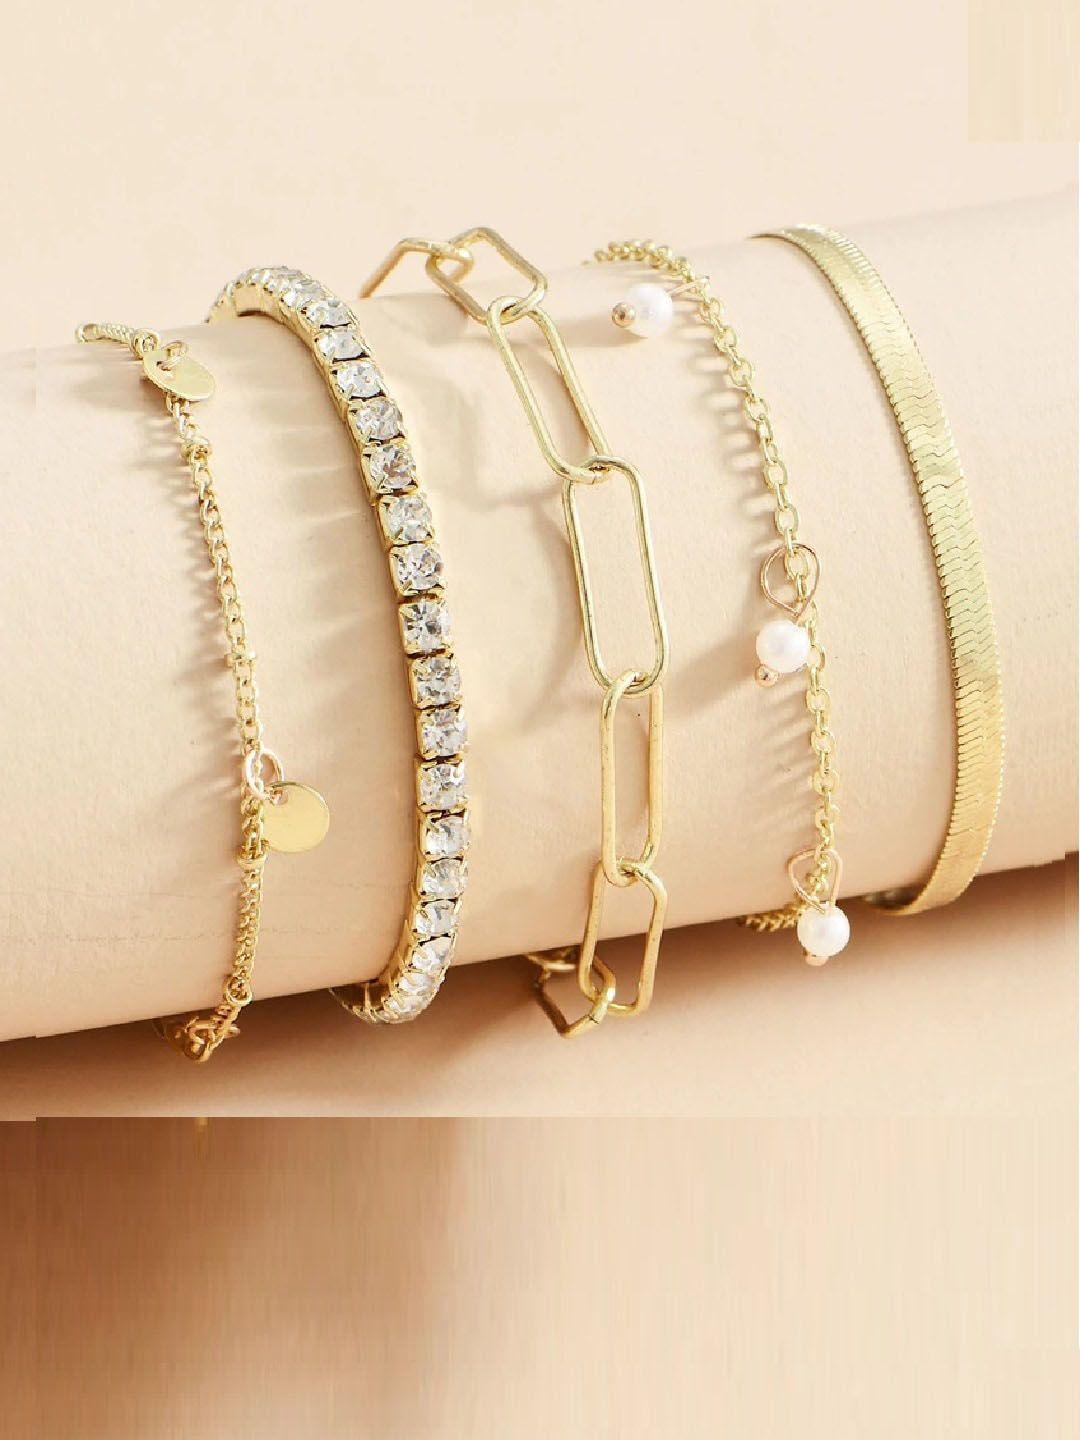 oomph women set of 5 gold-toned & white crystals charm bracelet